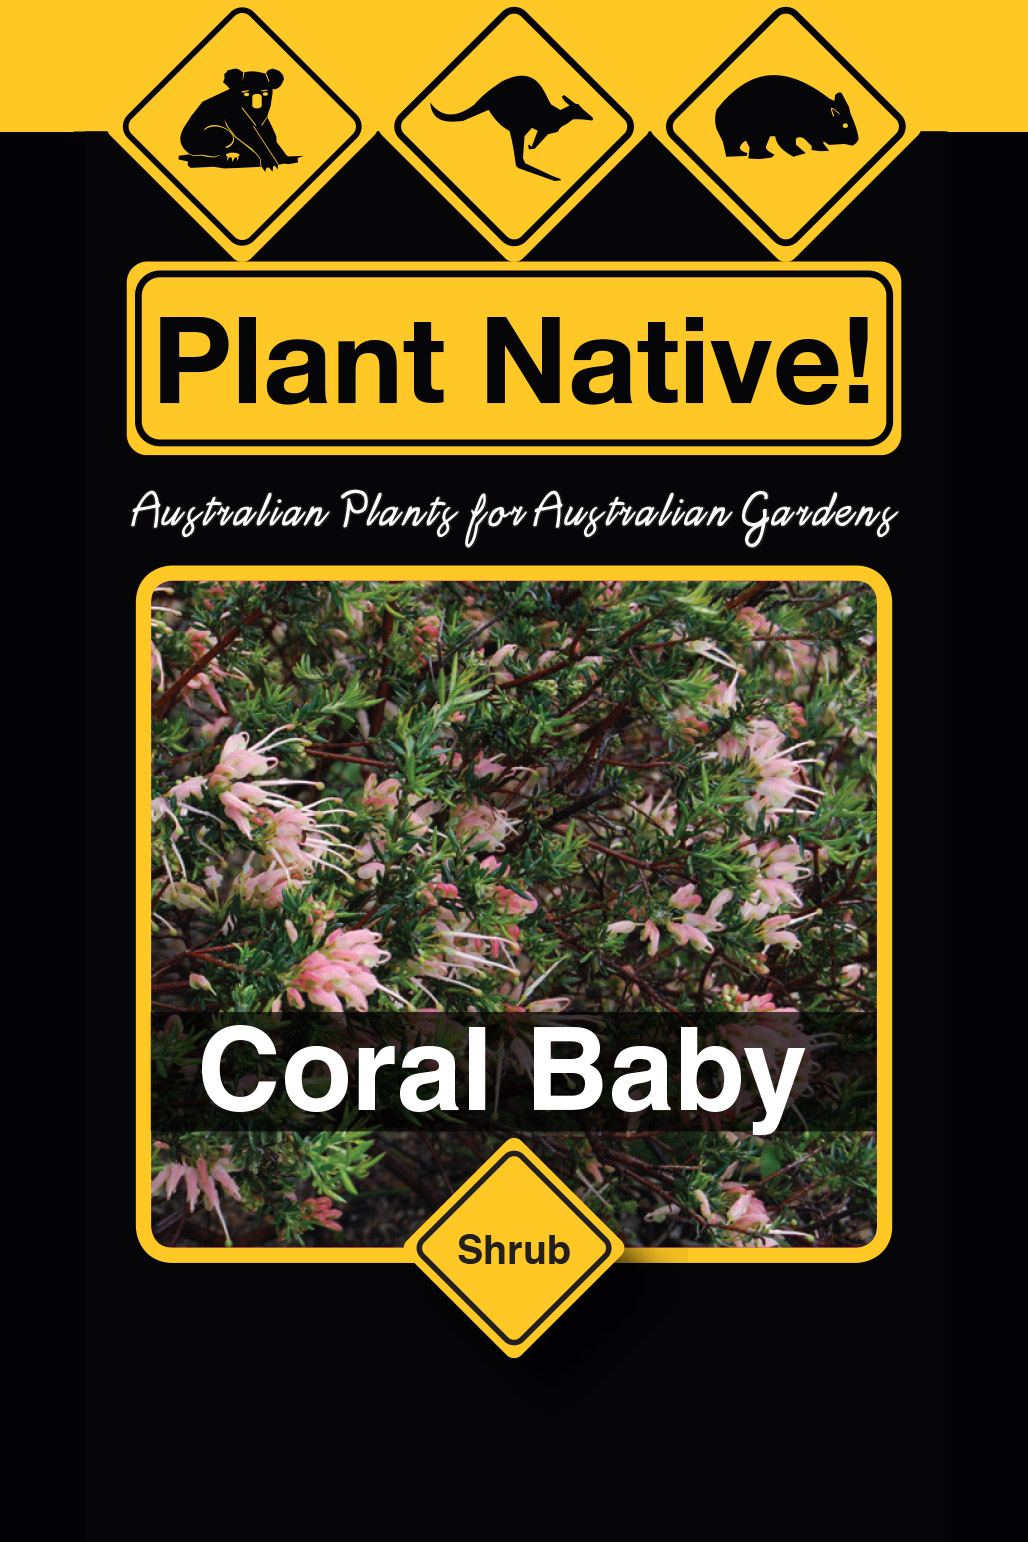 Coral Baby - Plant Native!